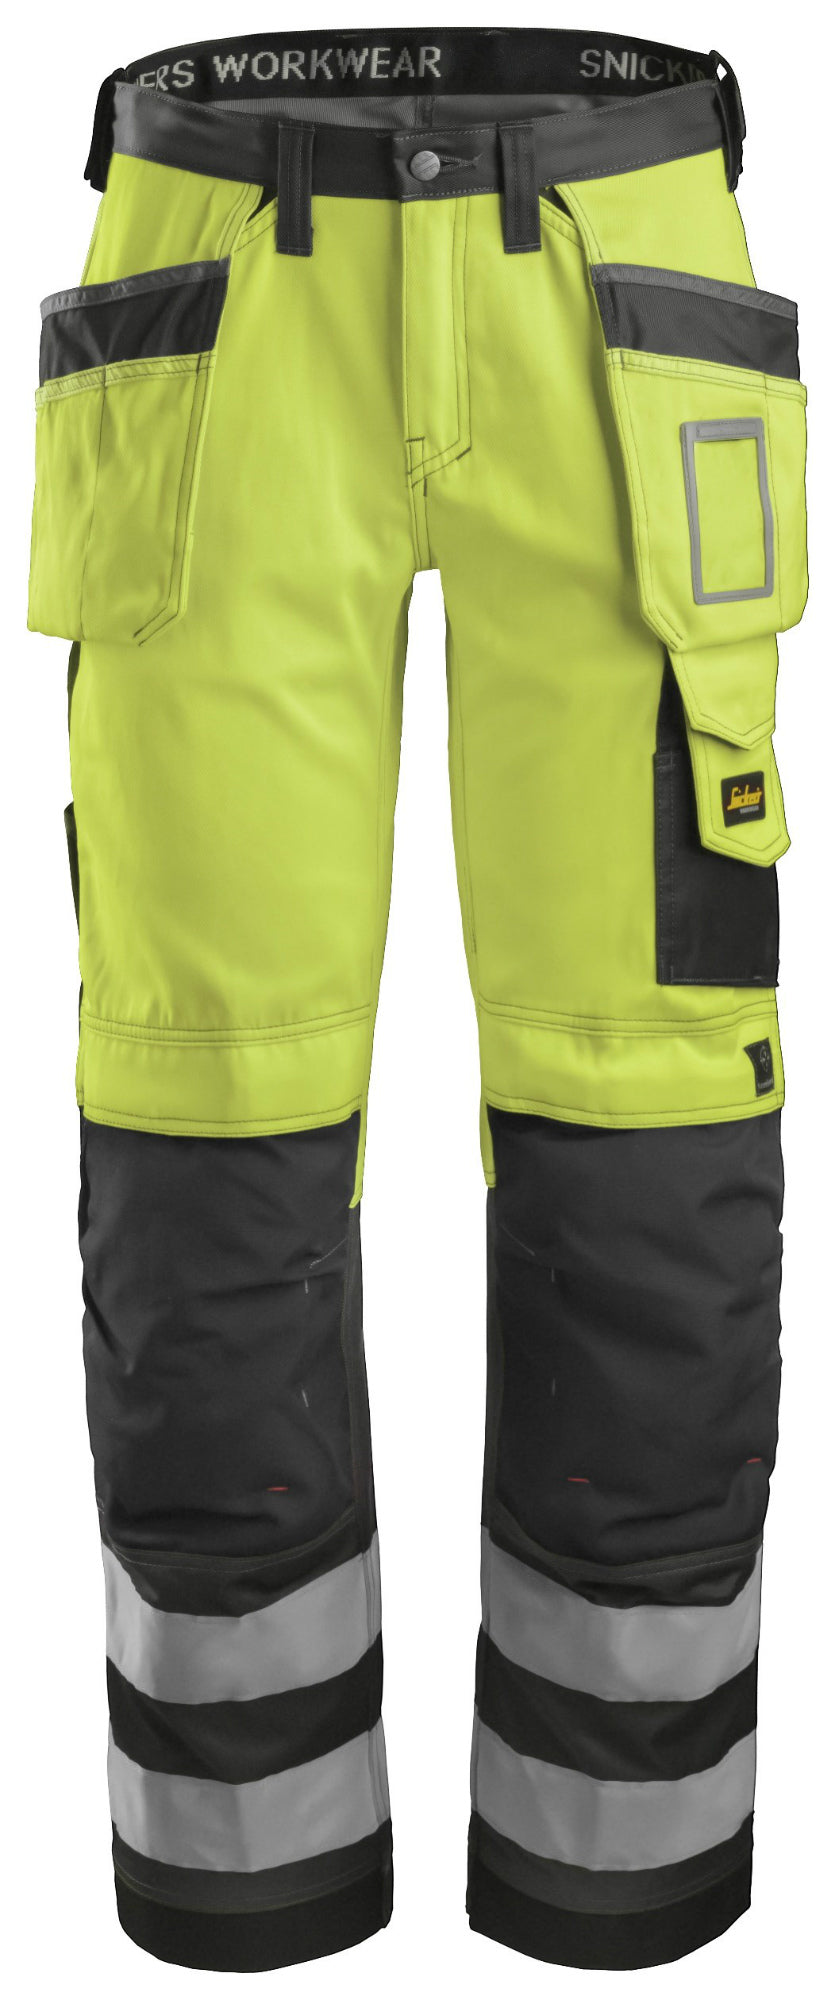 Snickers Workwear 3233 Hi-Vis Holster Pocket KneeGuard Trousers